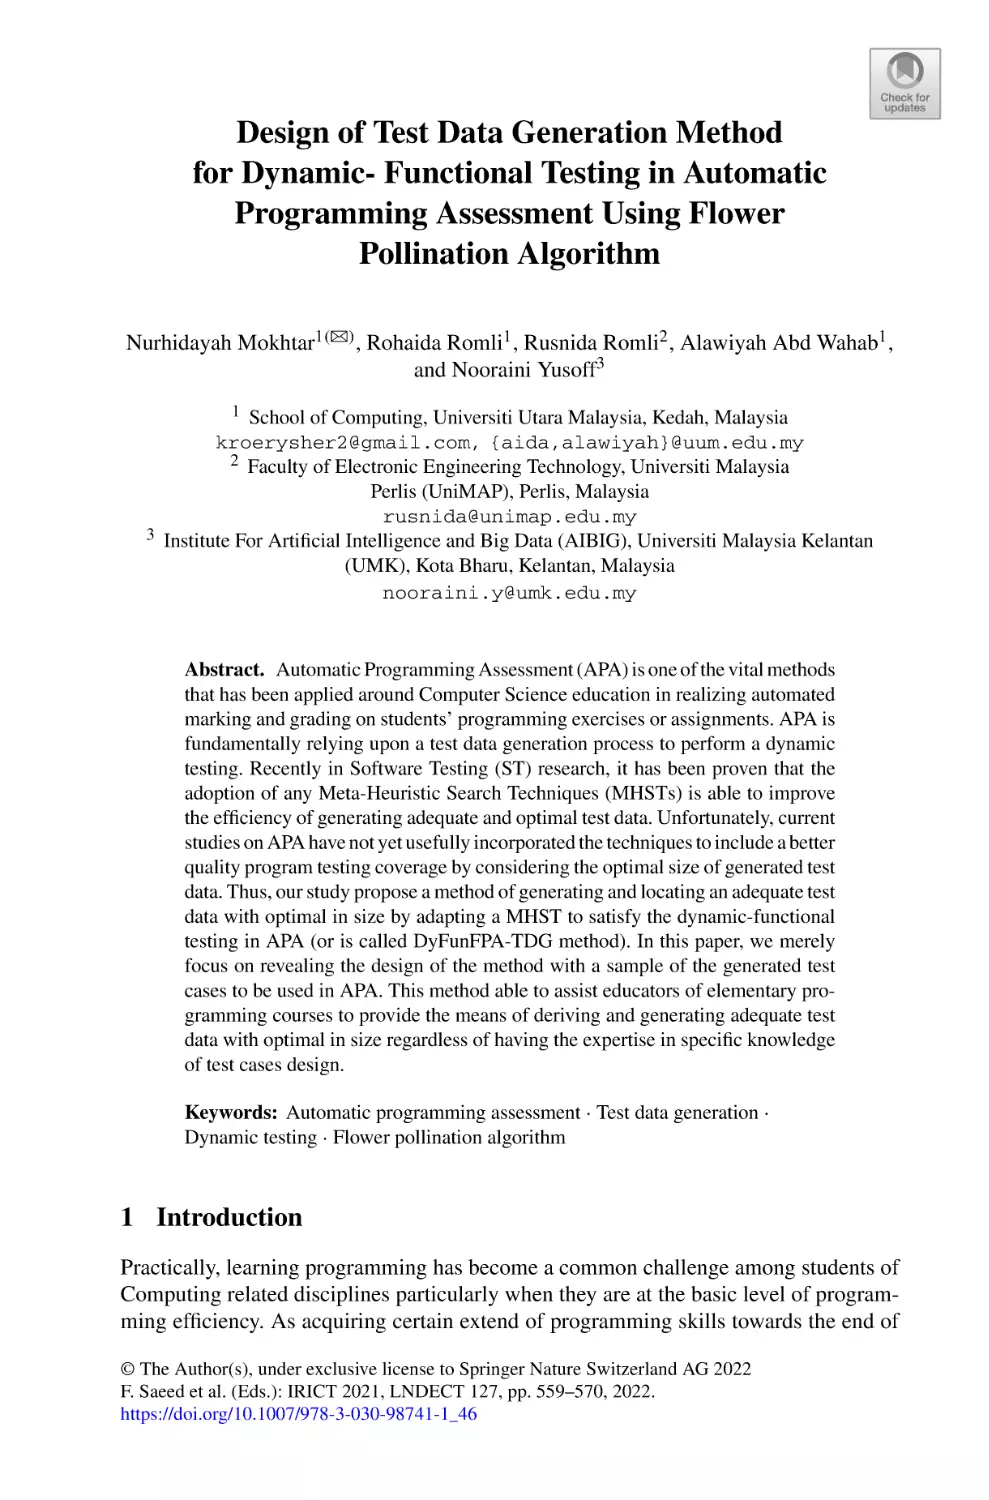 Design of Test Data Generation Method for Dynamic- Functional Testing in Automatic Programming Assessment Using Flower Pollination Algorithm
1 Introduction